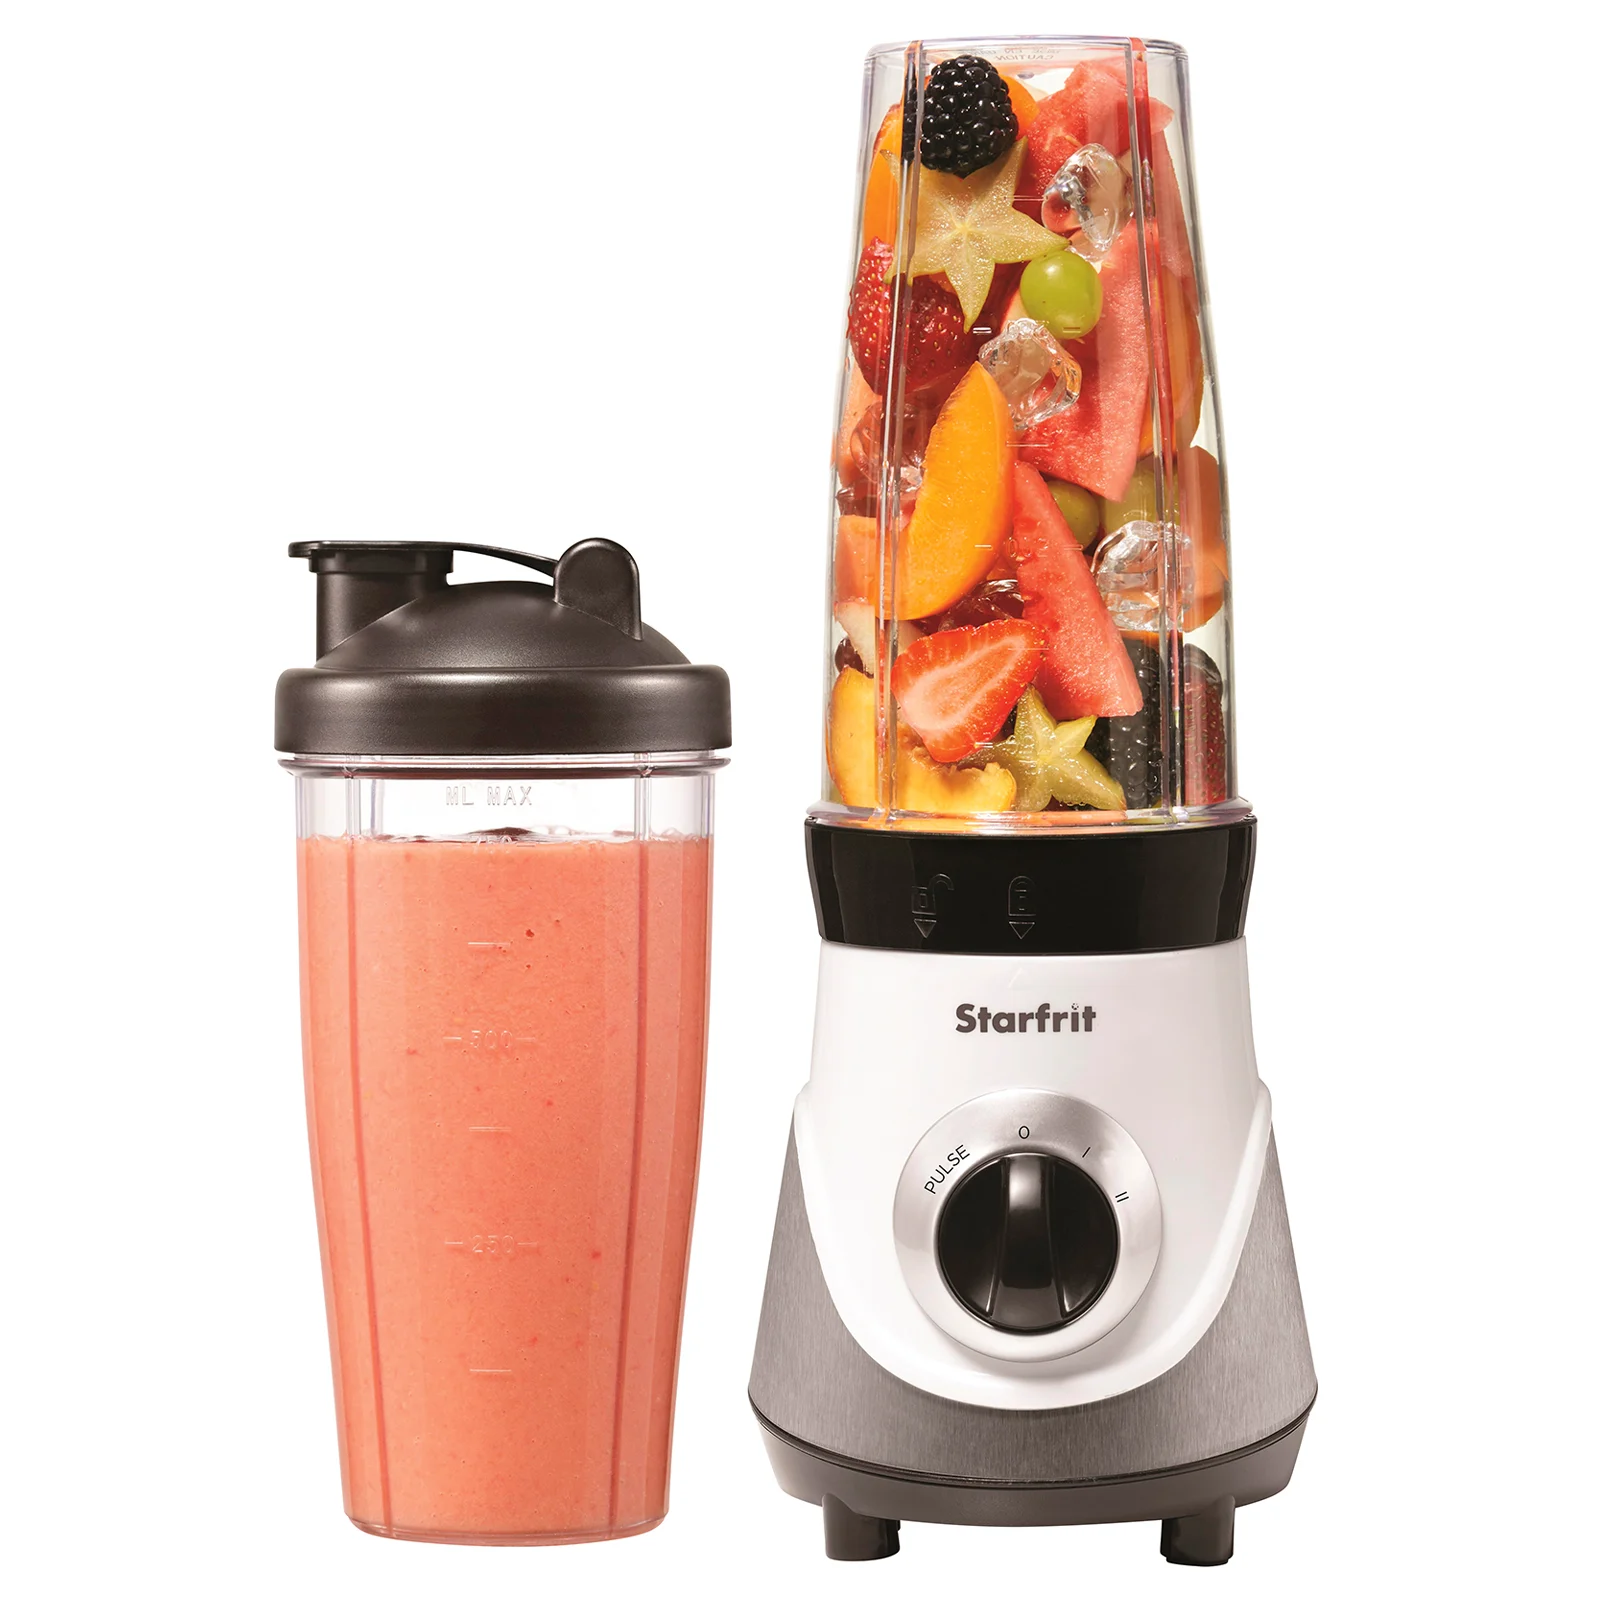 A personal blender 